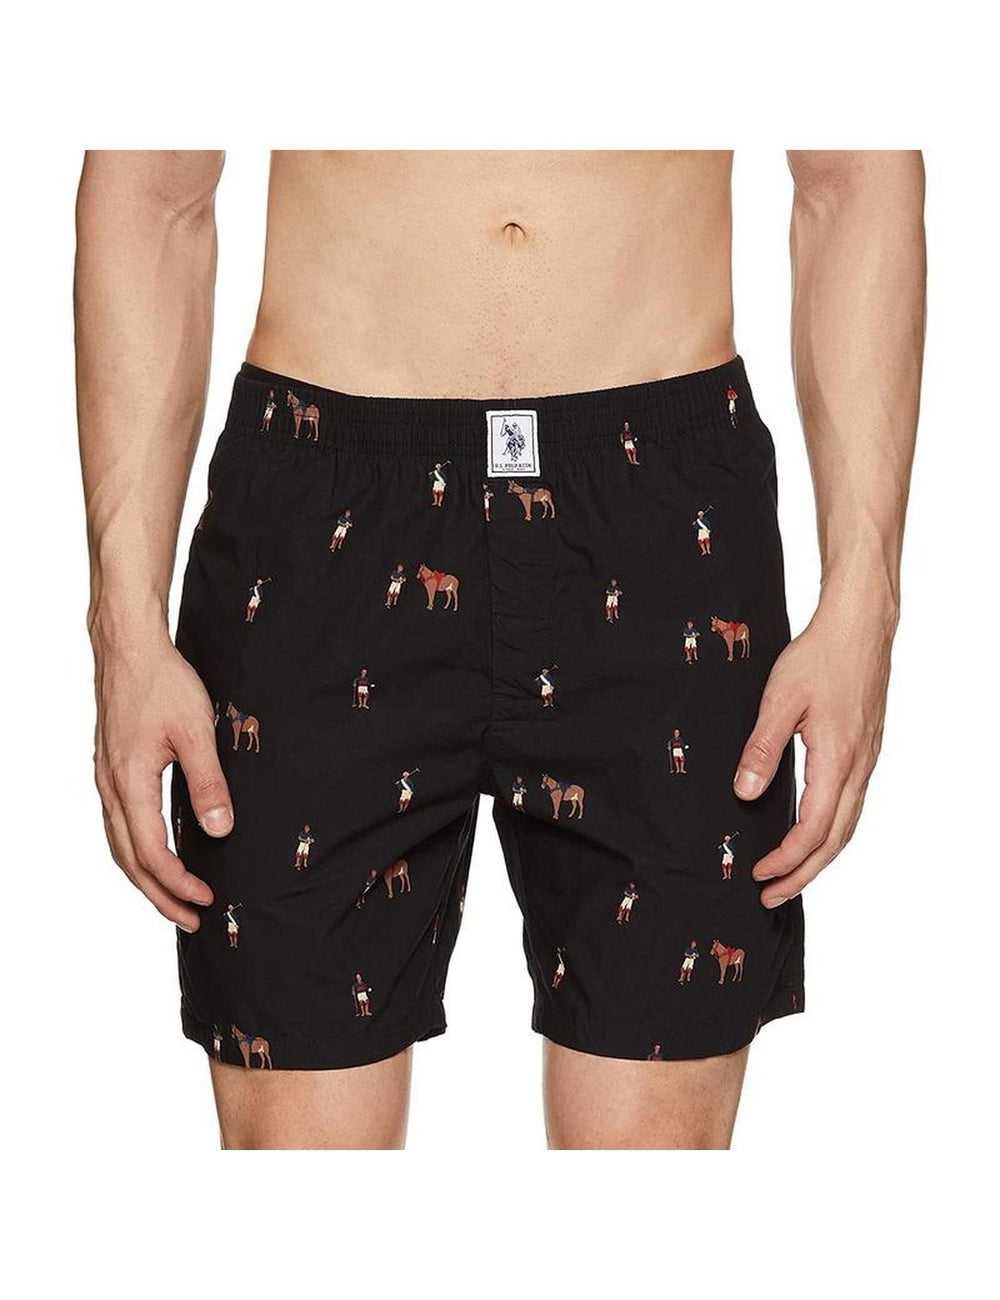 US Polo Printed Black Cotton Boxers Shorts for Men